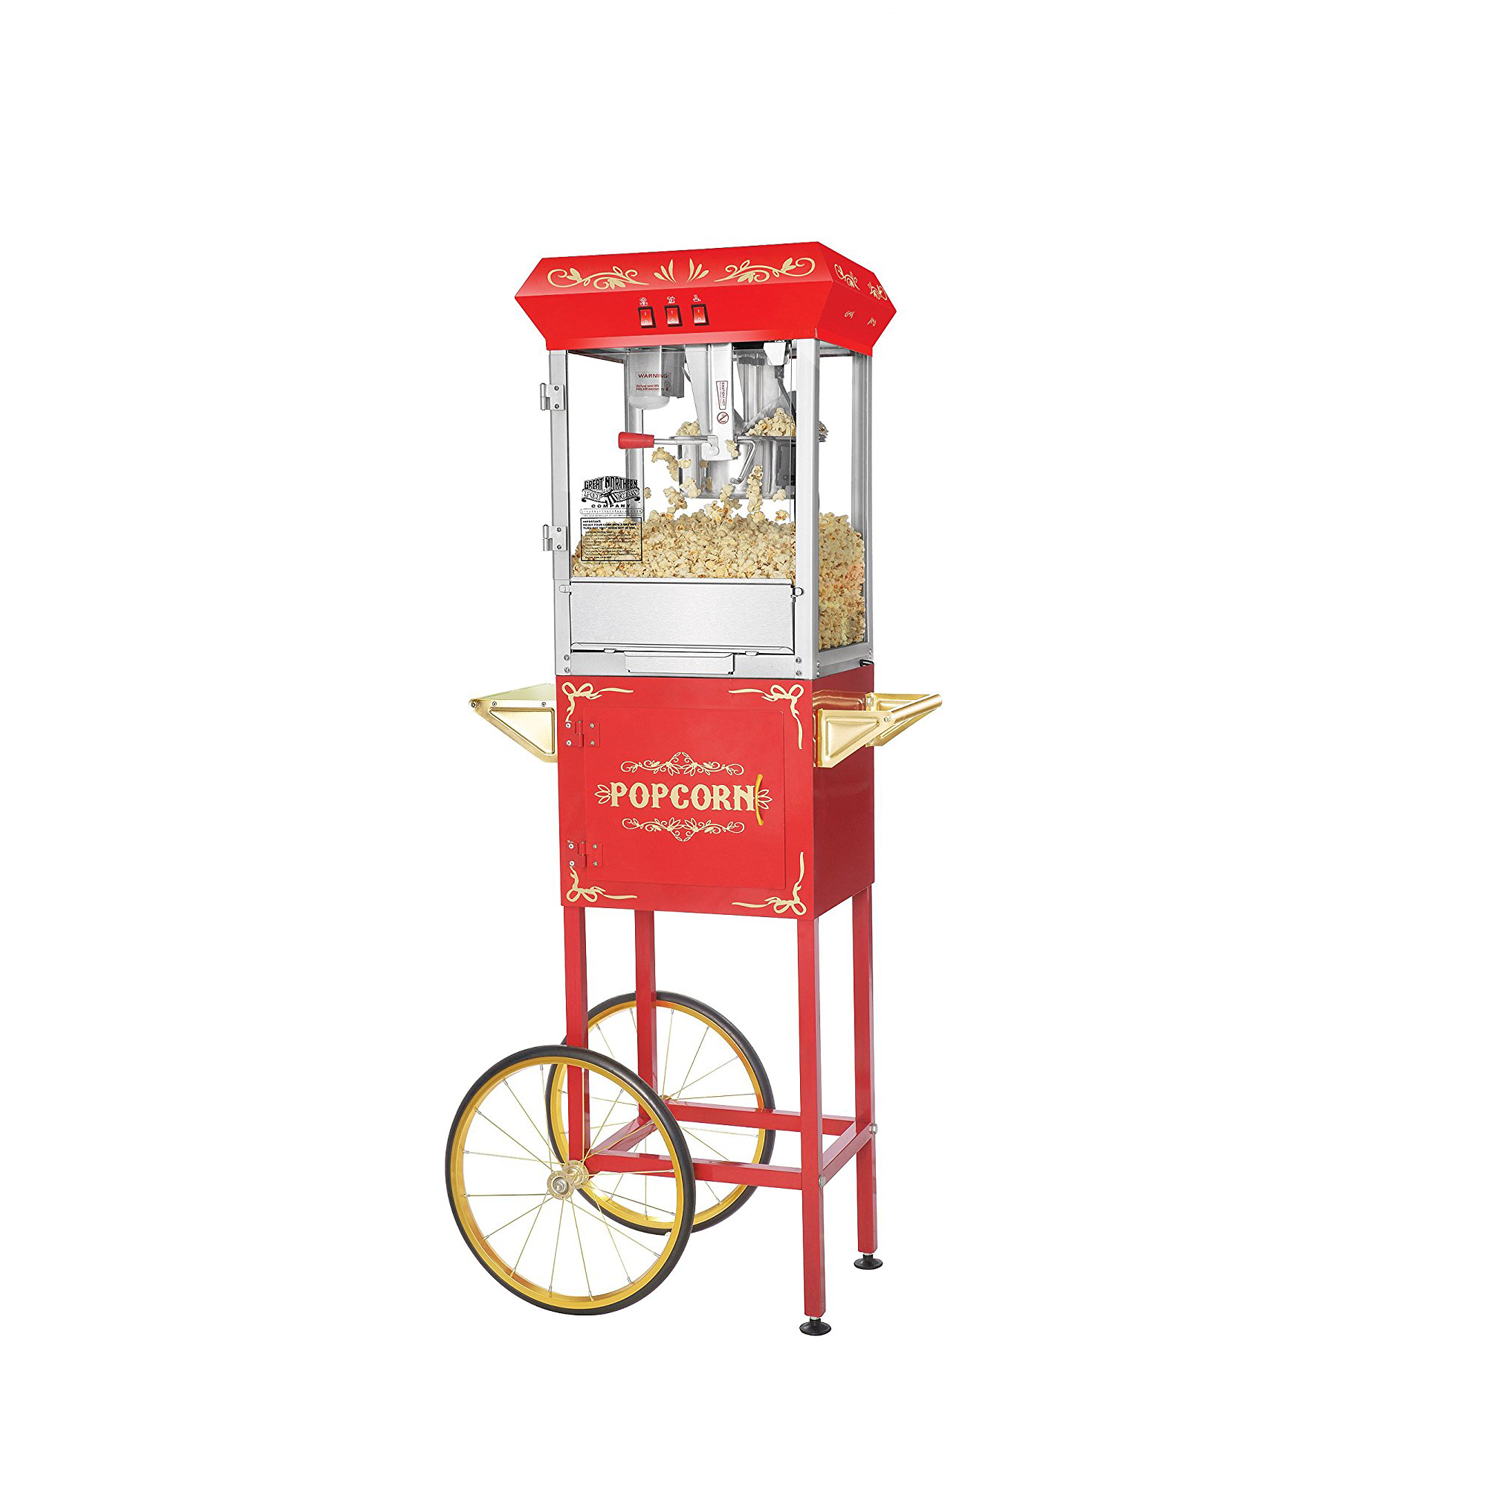 Popcorn machines are back at Tuesday Morning this week